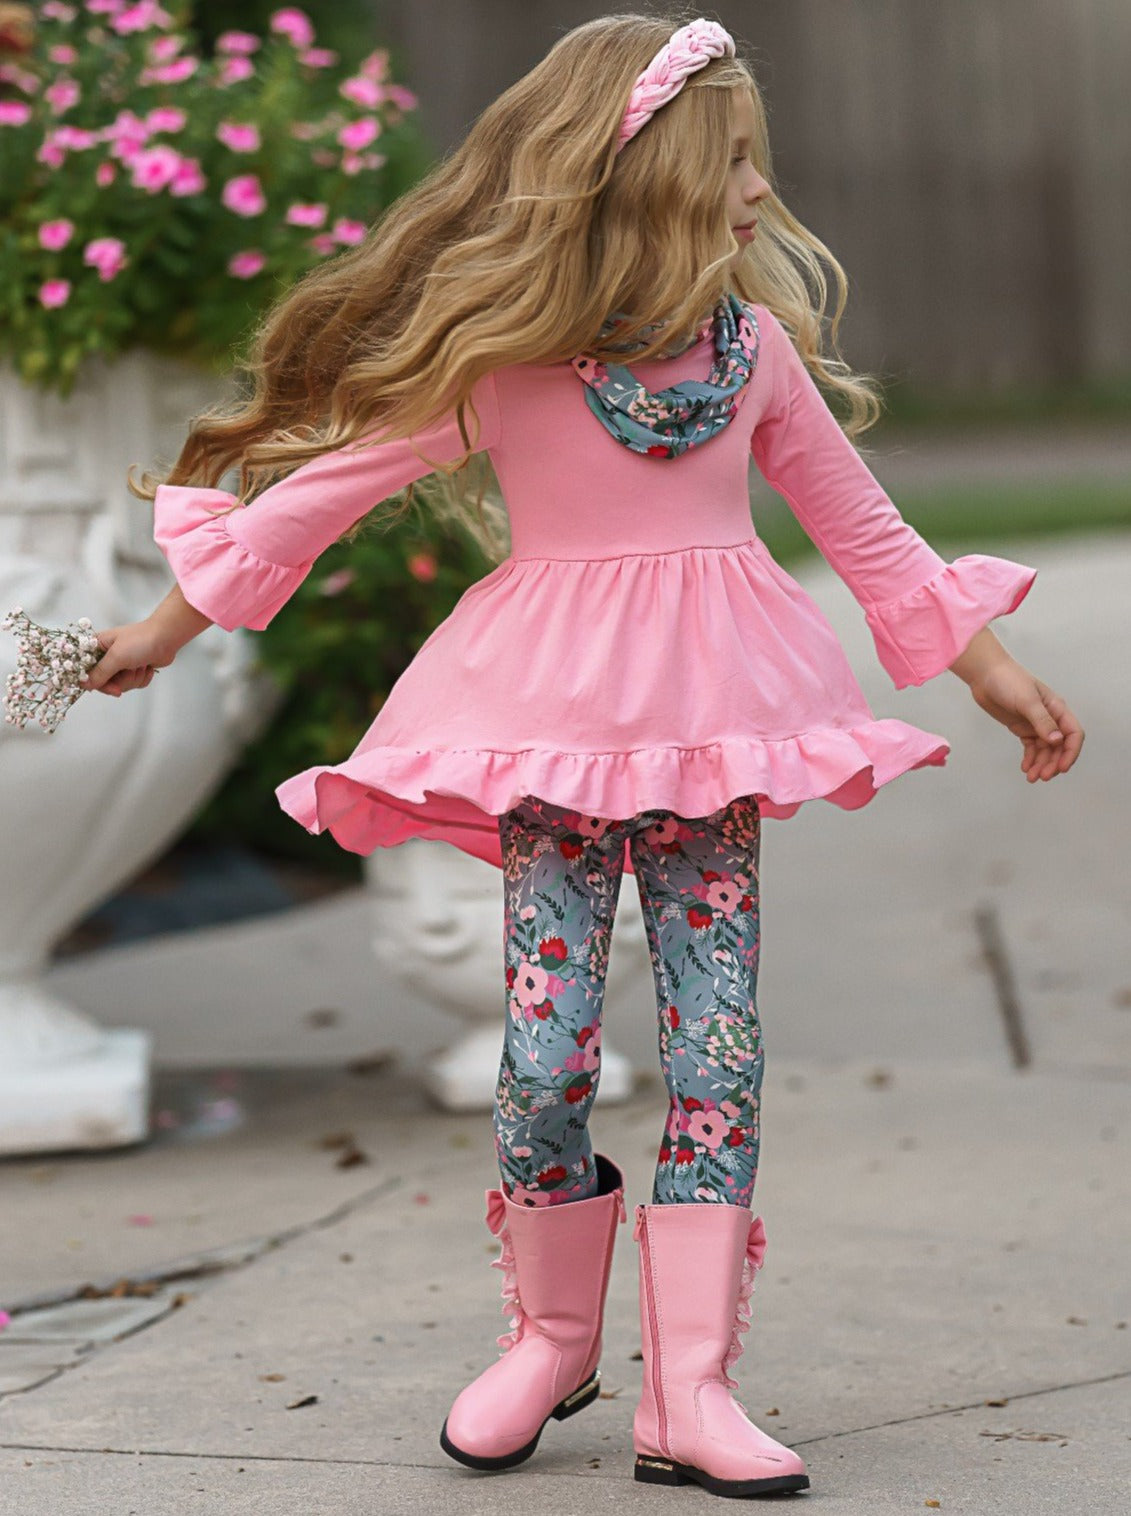 Toddler-Girls-Fall-Clothes-Set Little Girls Tunic Tops+Leggings Outfit  Boutique Clothing 